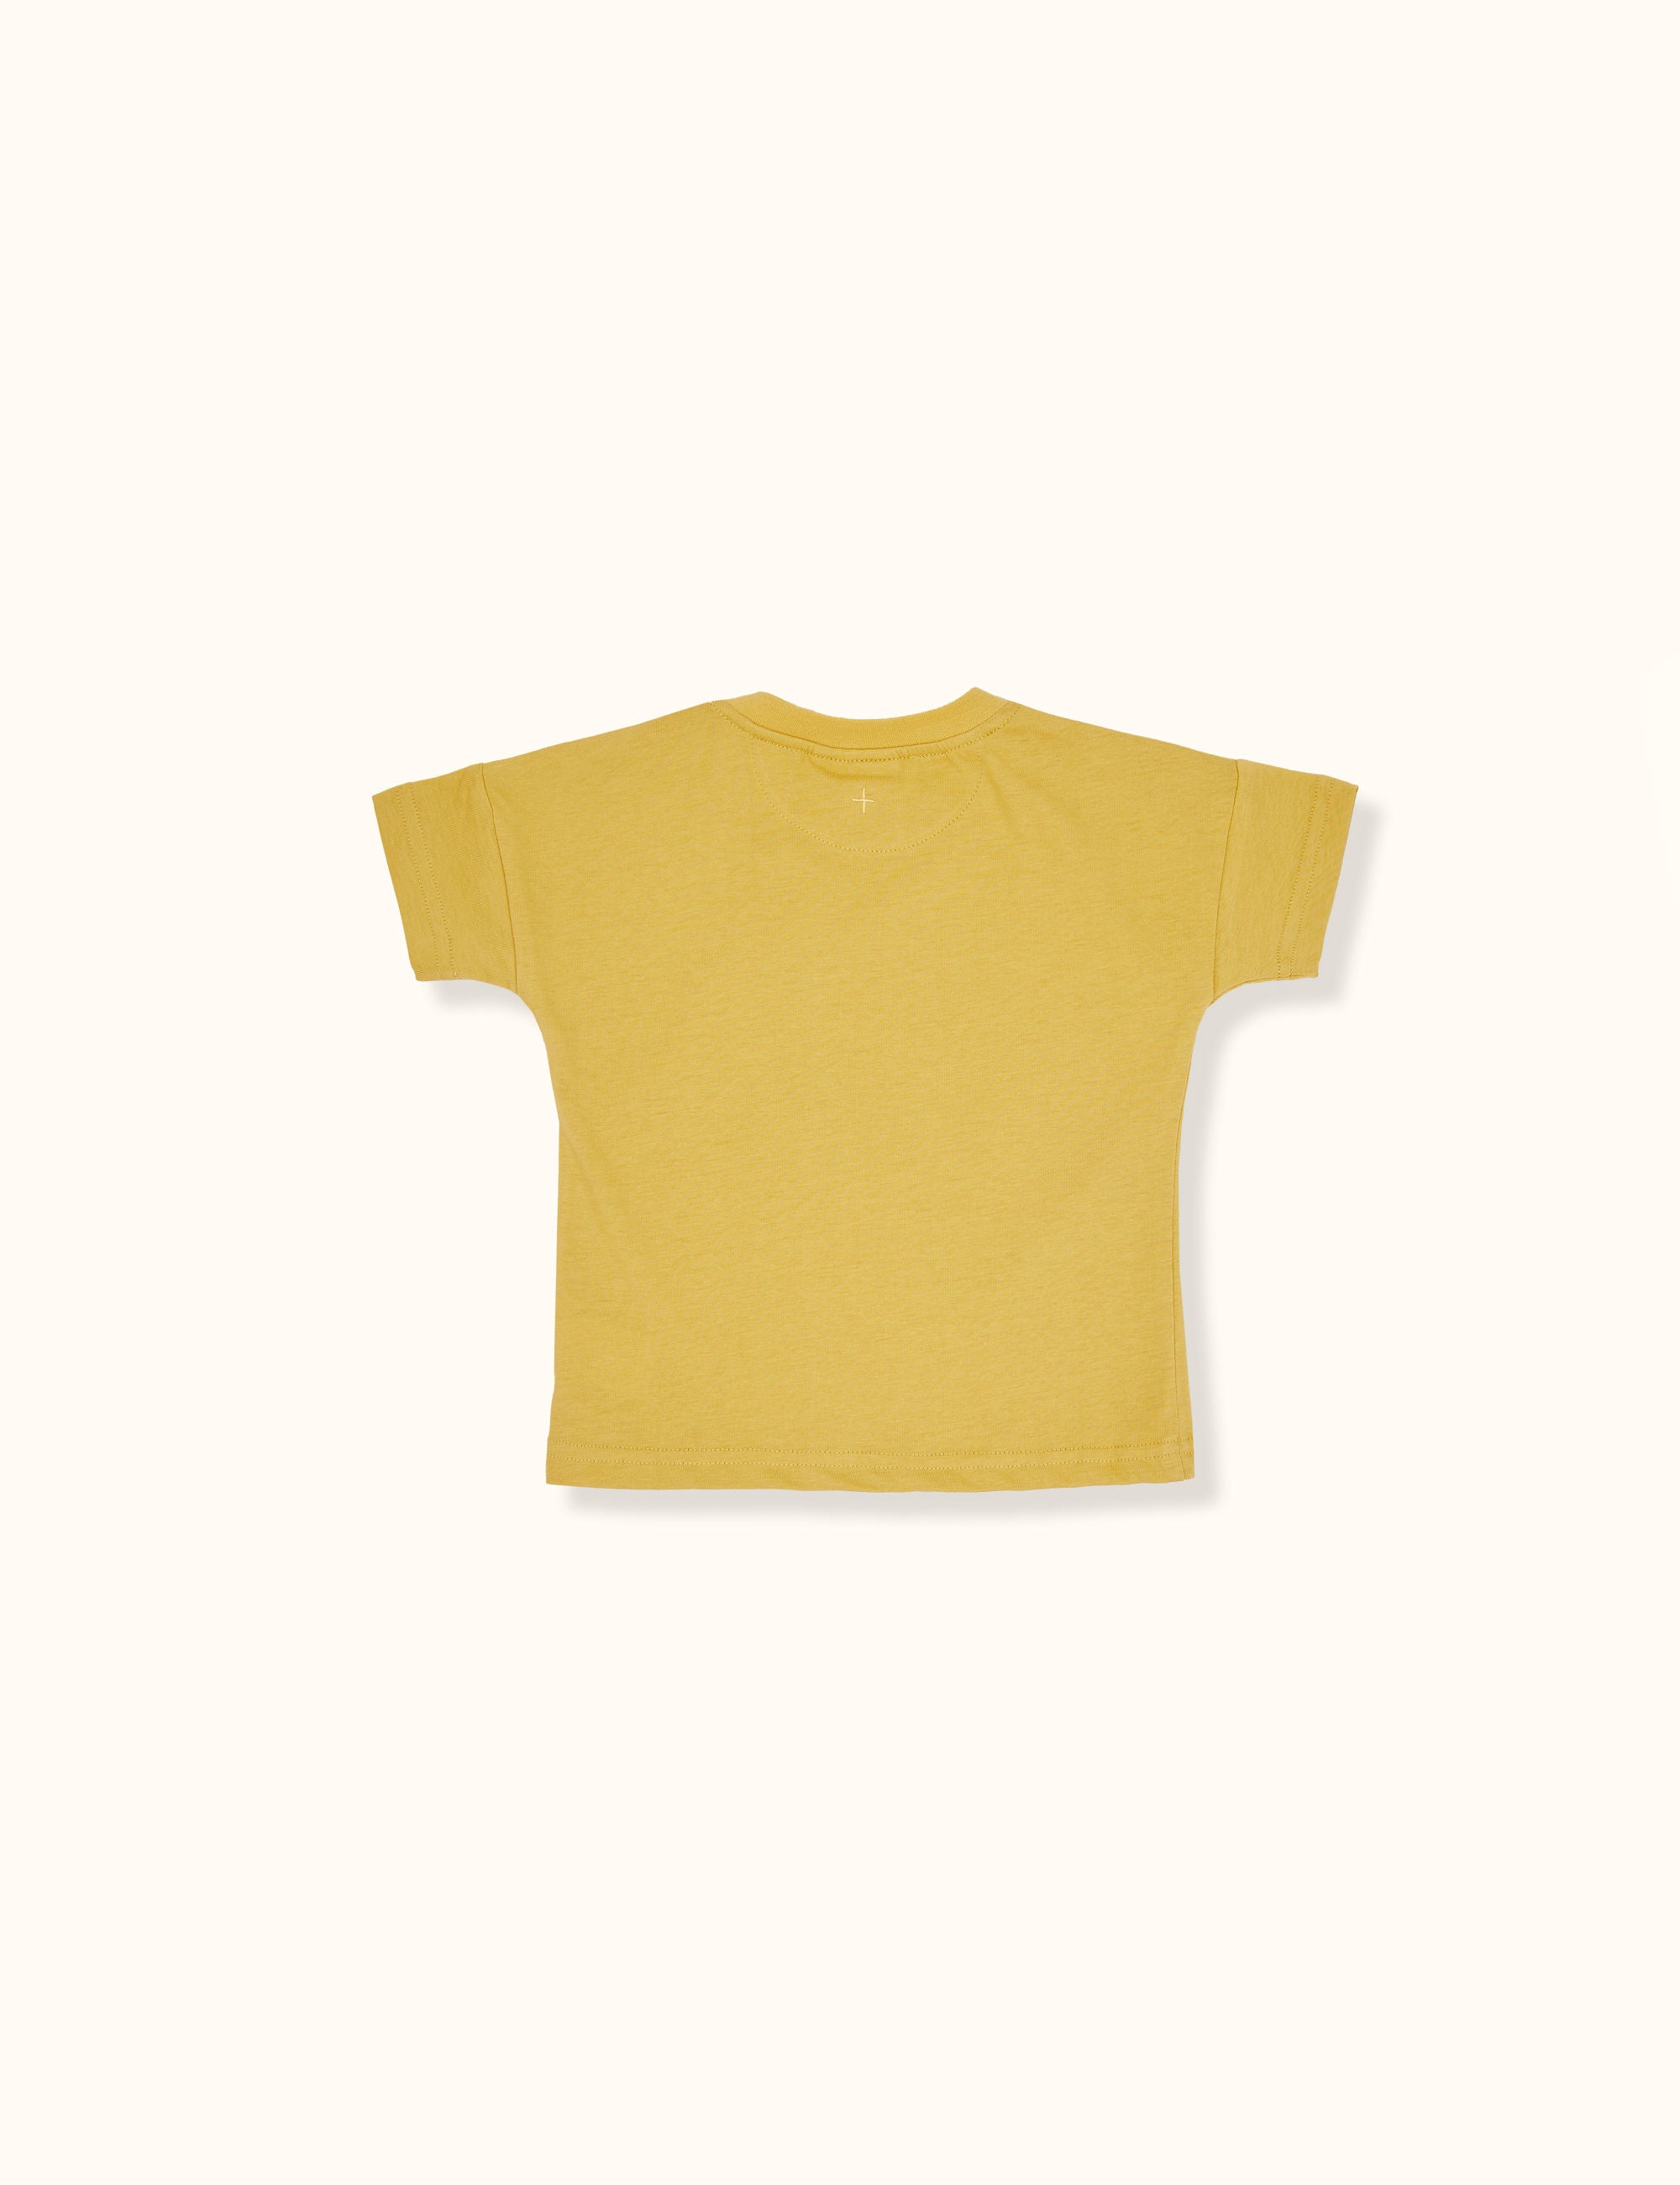 Goldie + Ace - Hold Hands T-Shirt